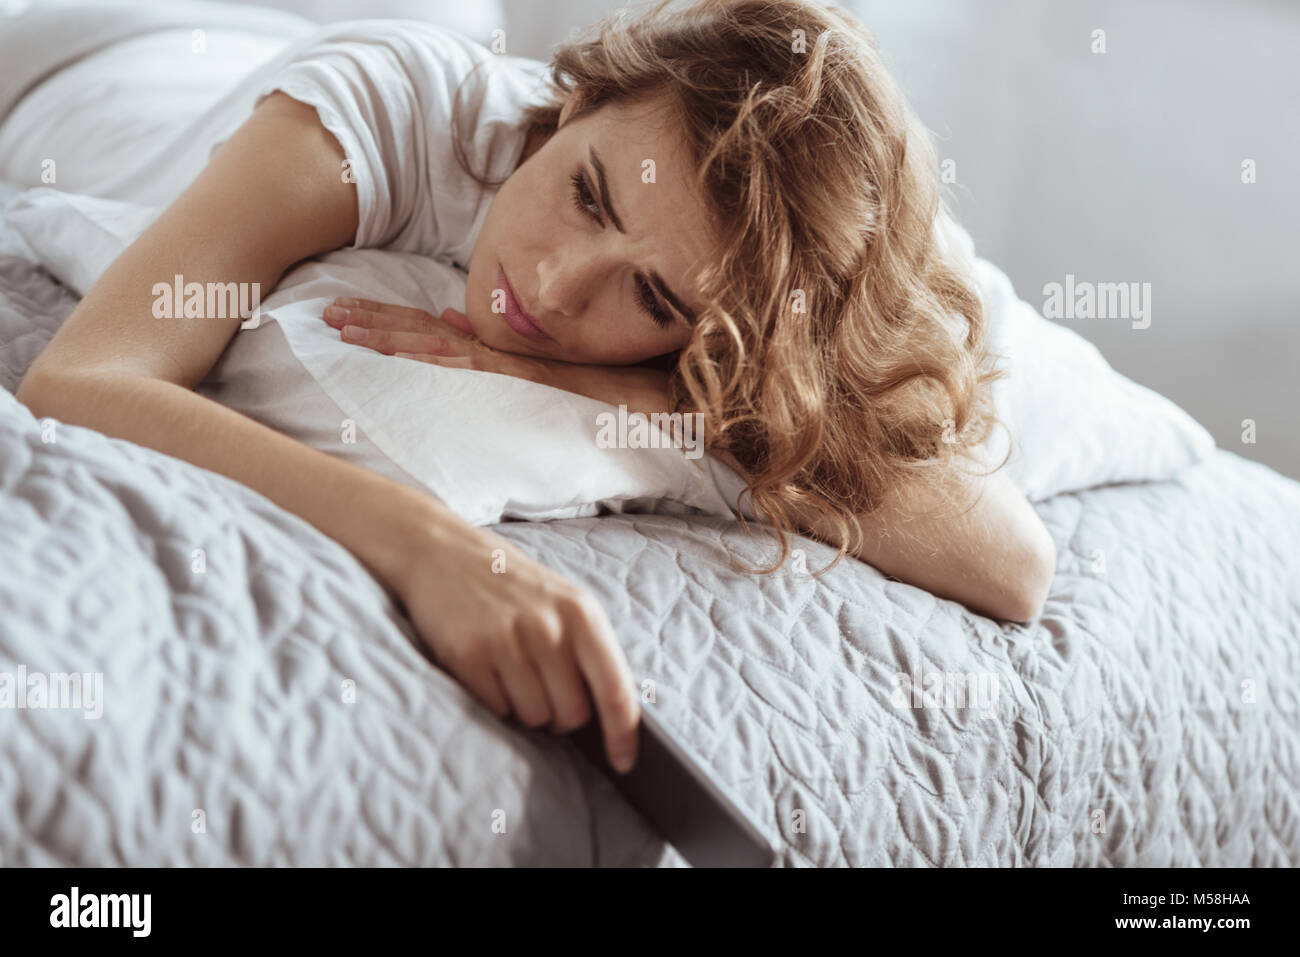 Depressed woman having negative thoughts while lying on bed Stock Photo